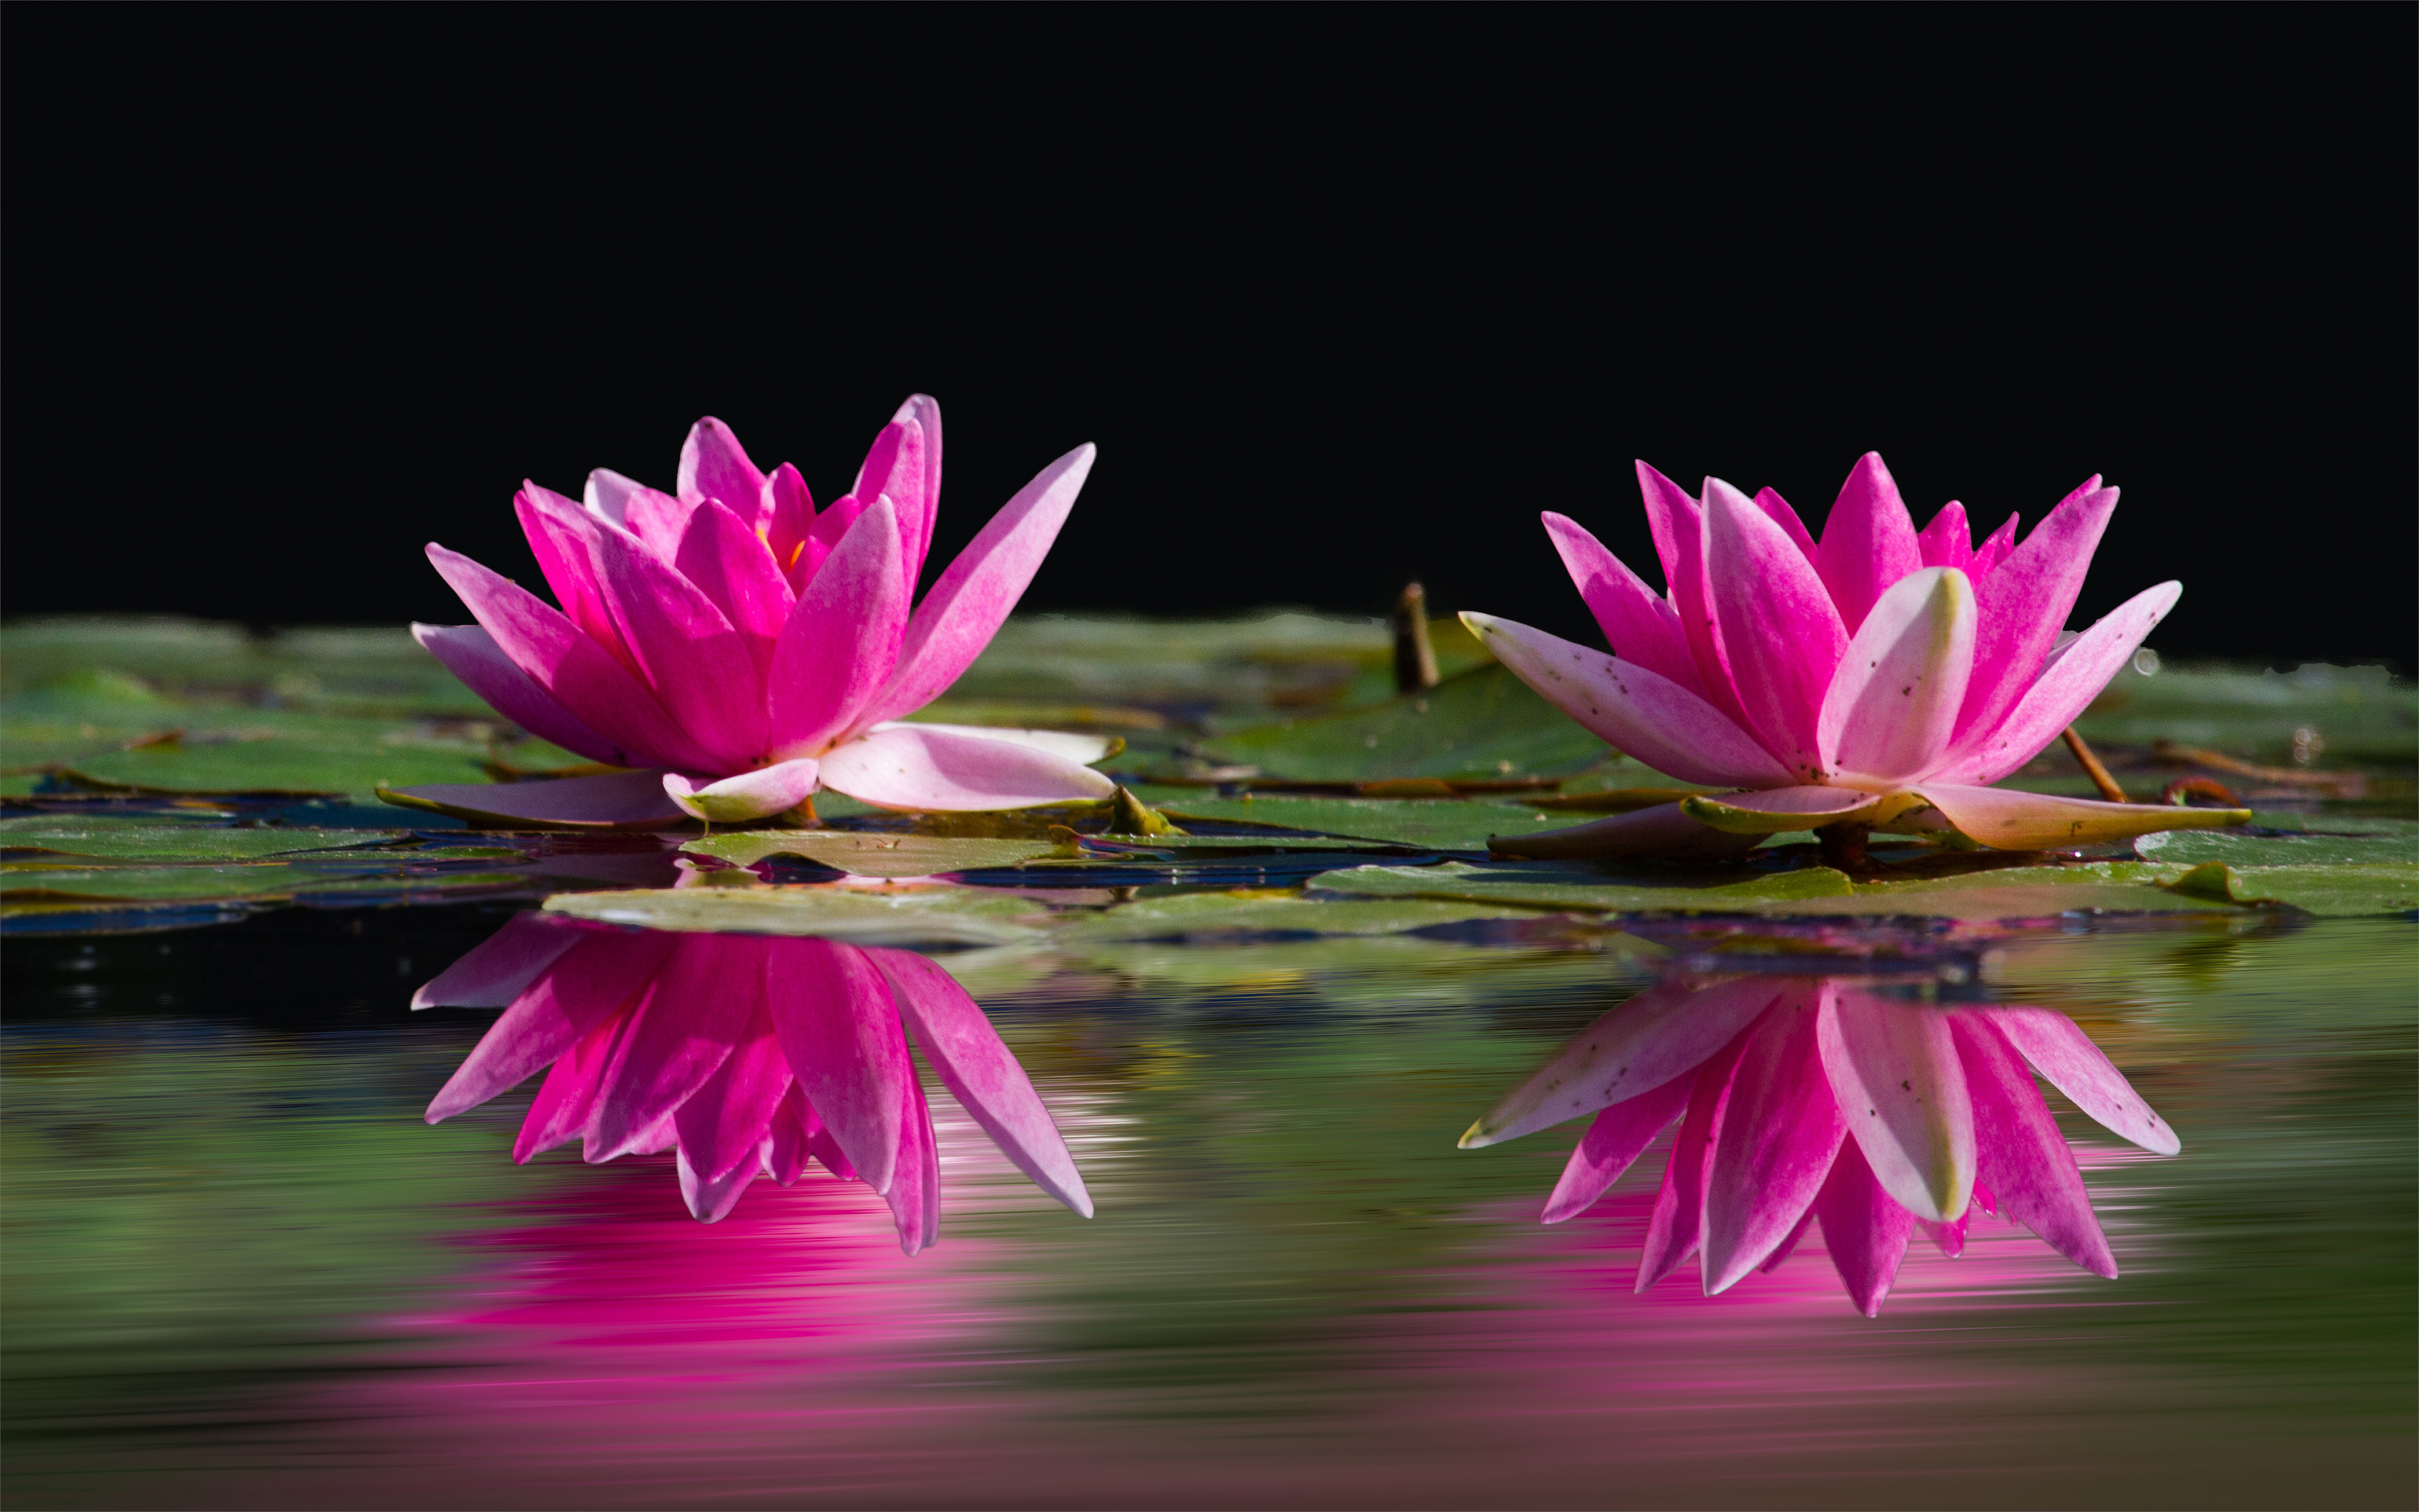 Pink Flowers Water Lilies Reflection In Water Nature Wallpaper Flower Full Hd For Desktop